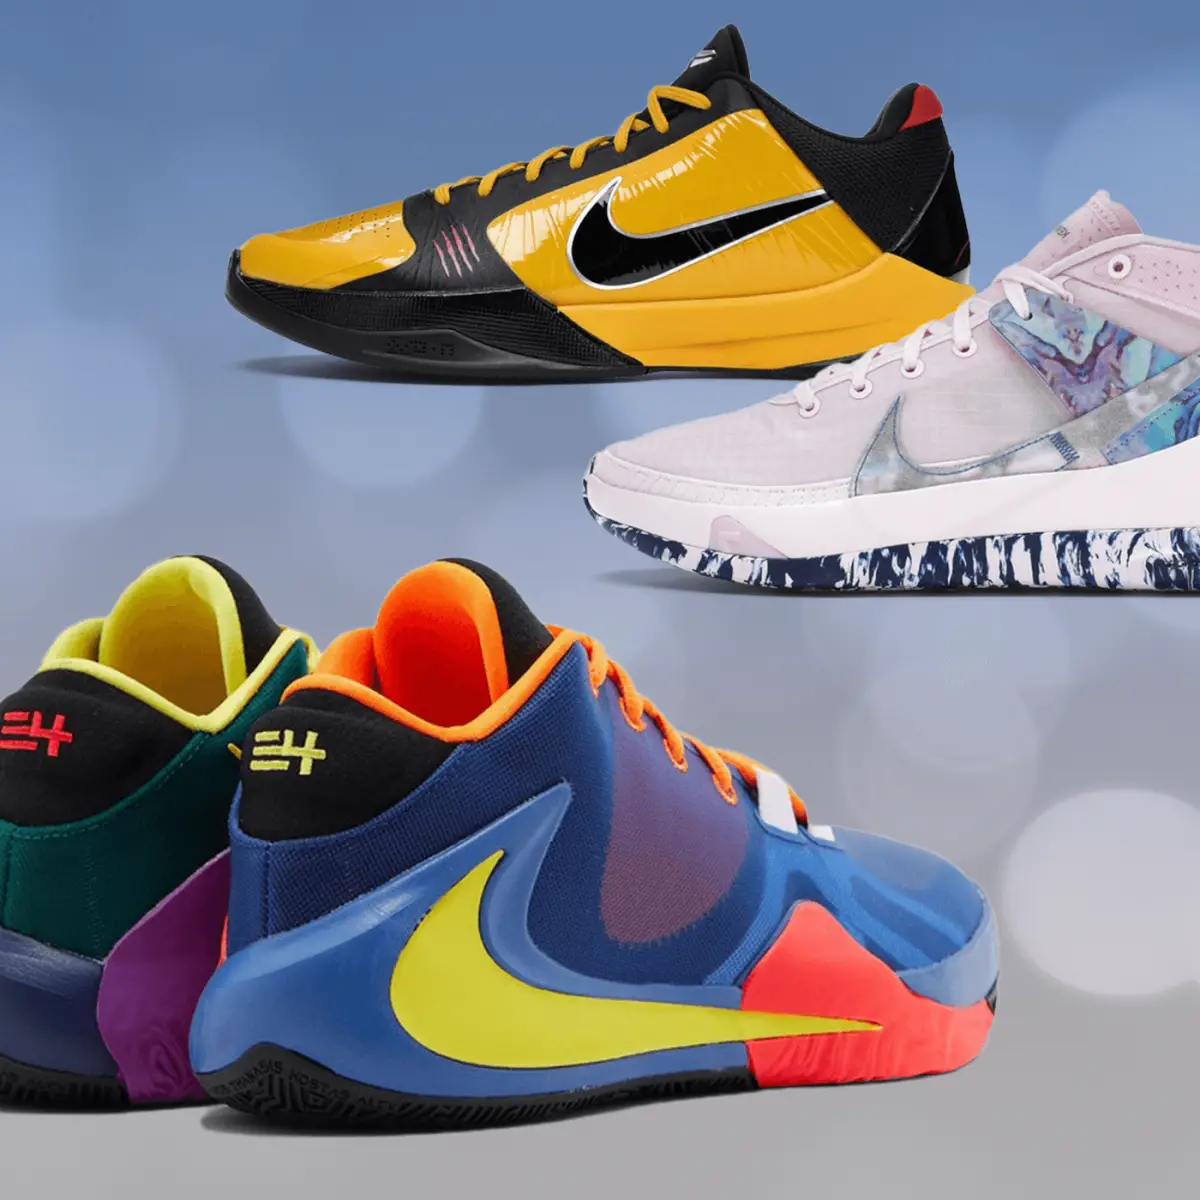 The Best Nike Basketball Shoes In 2020